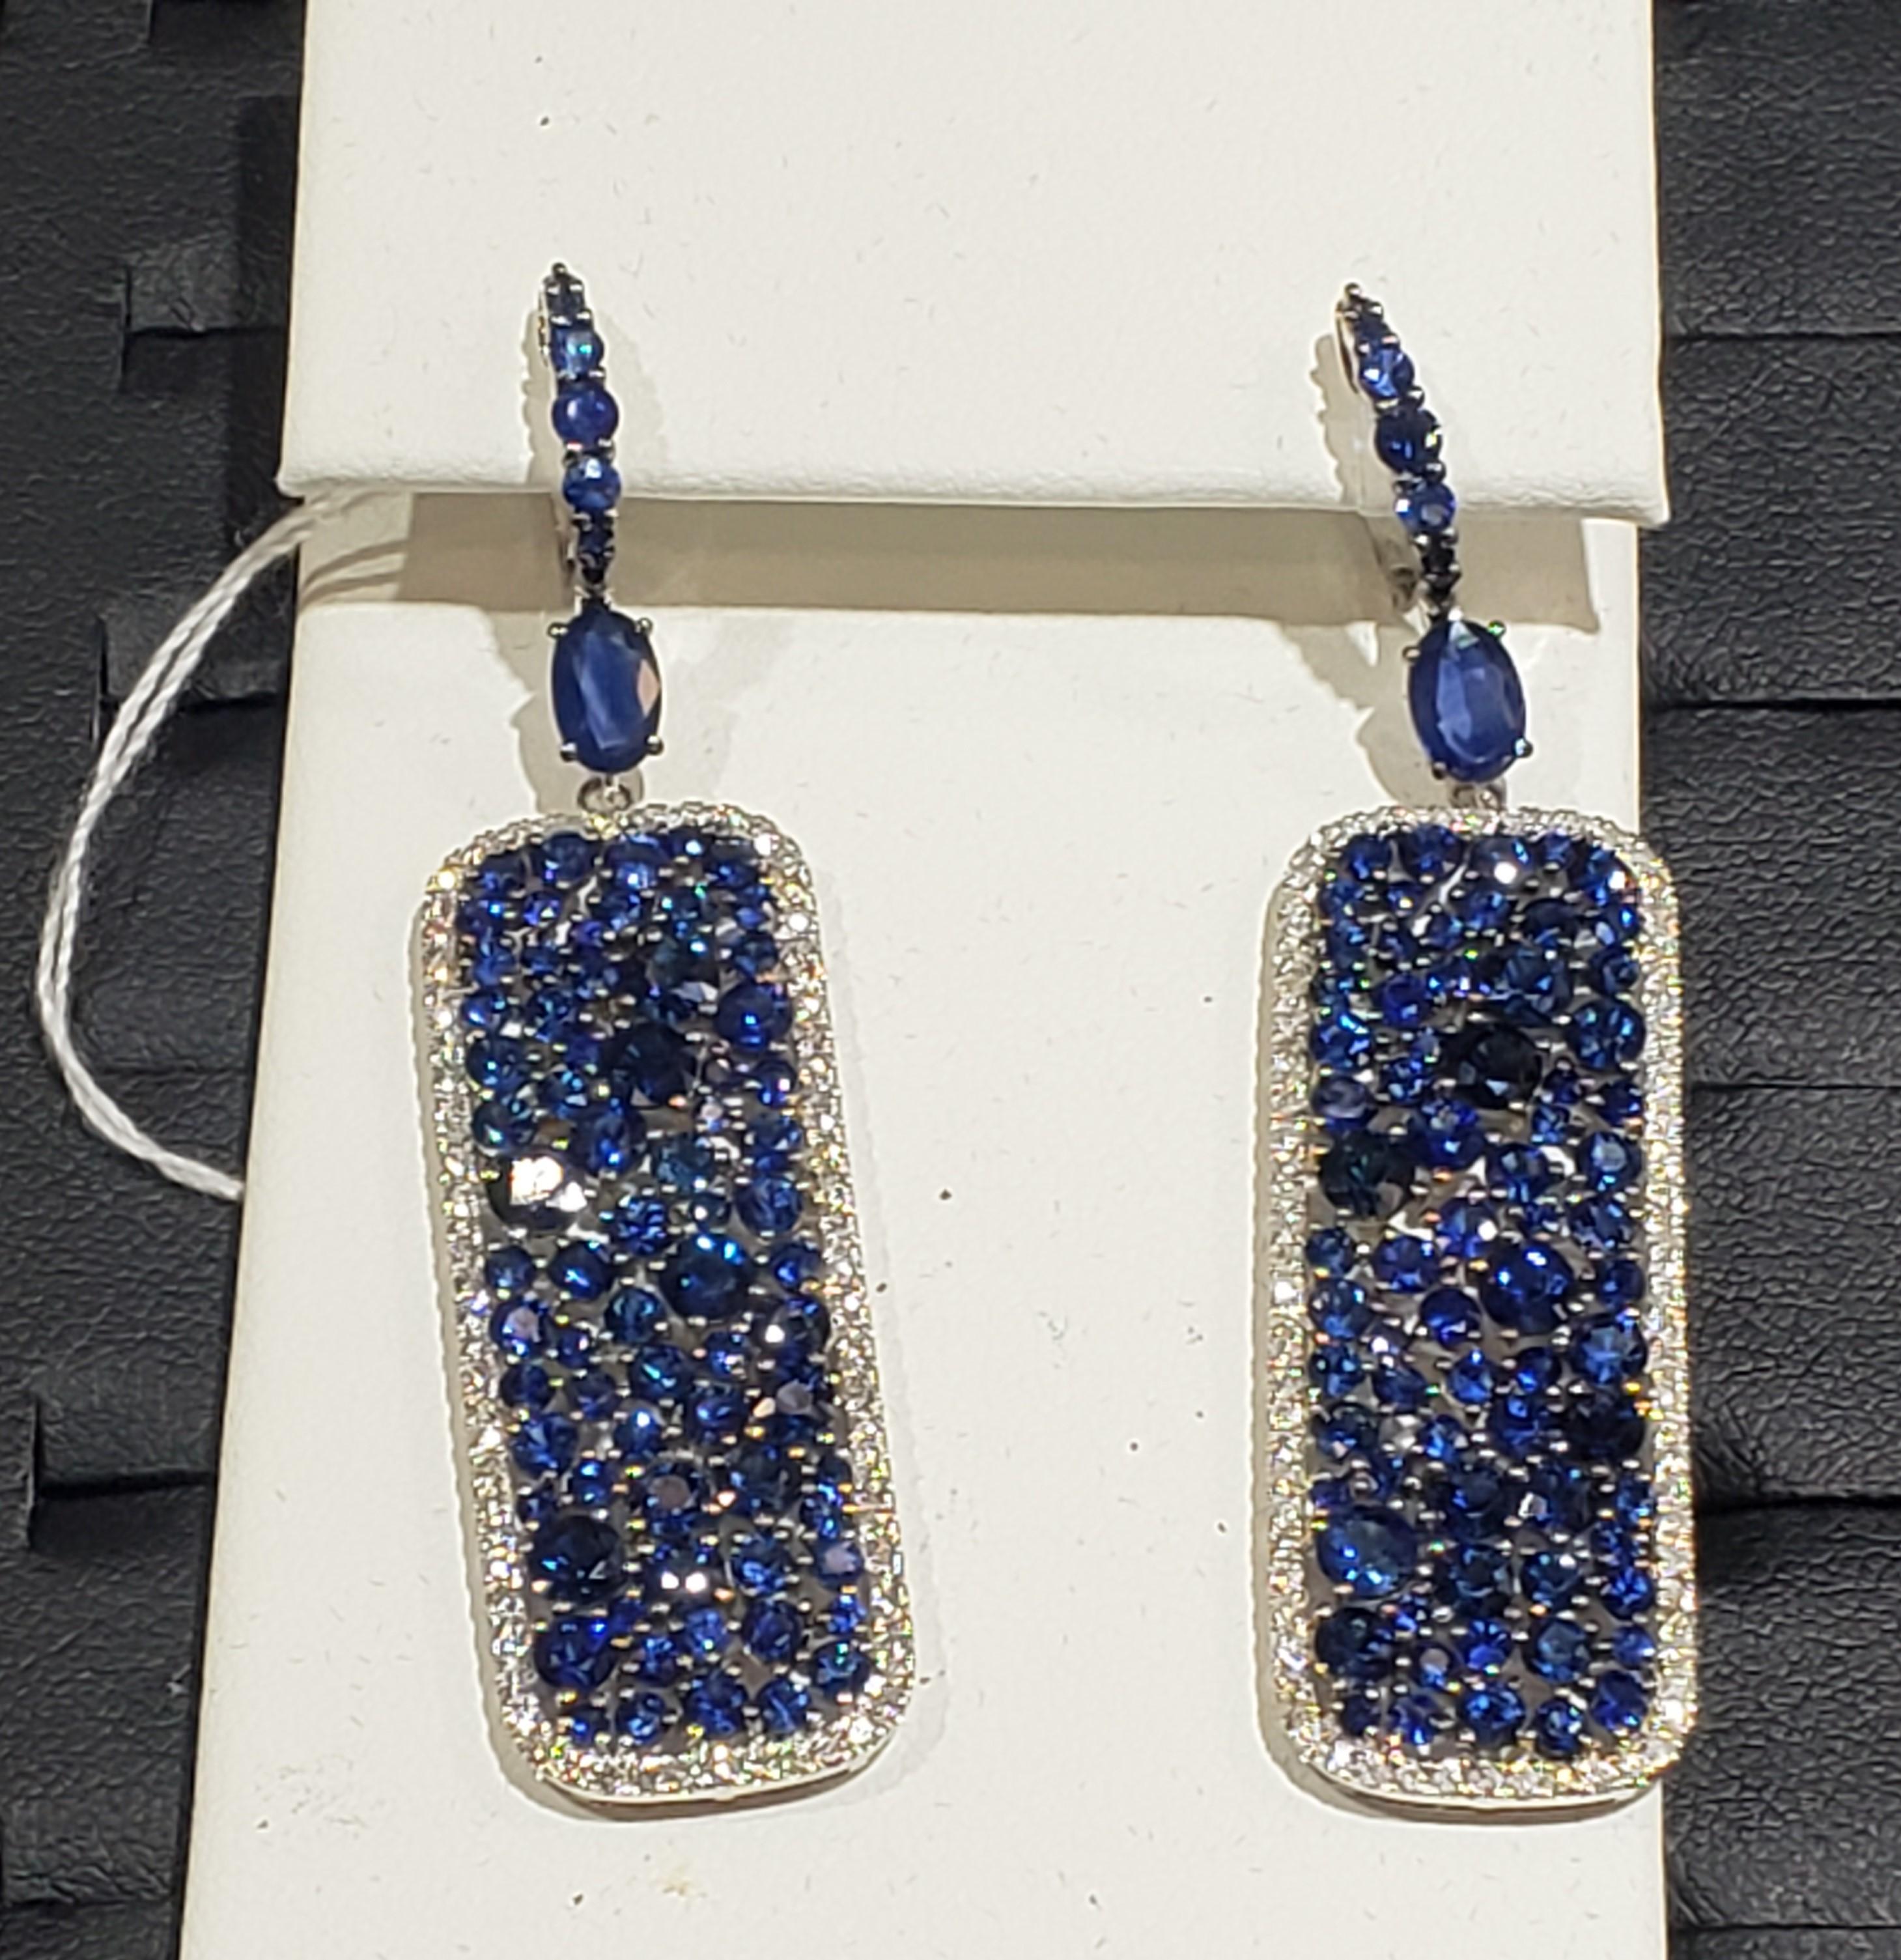 The Following Item we are offering is a Rare Important Radiant 18KT Gold Pair of Rare Gorgeous Large Shimmering Blue Sapphire and Diamond Dangle Earrings. Earrings are comprised of Beautiful Shimmering Assorted Magnificent Blue Sapphires with